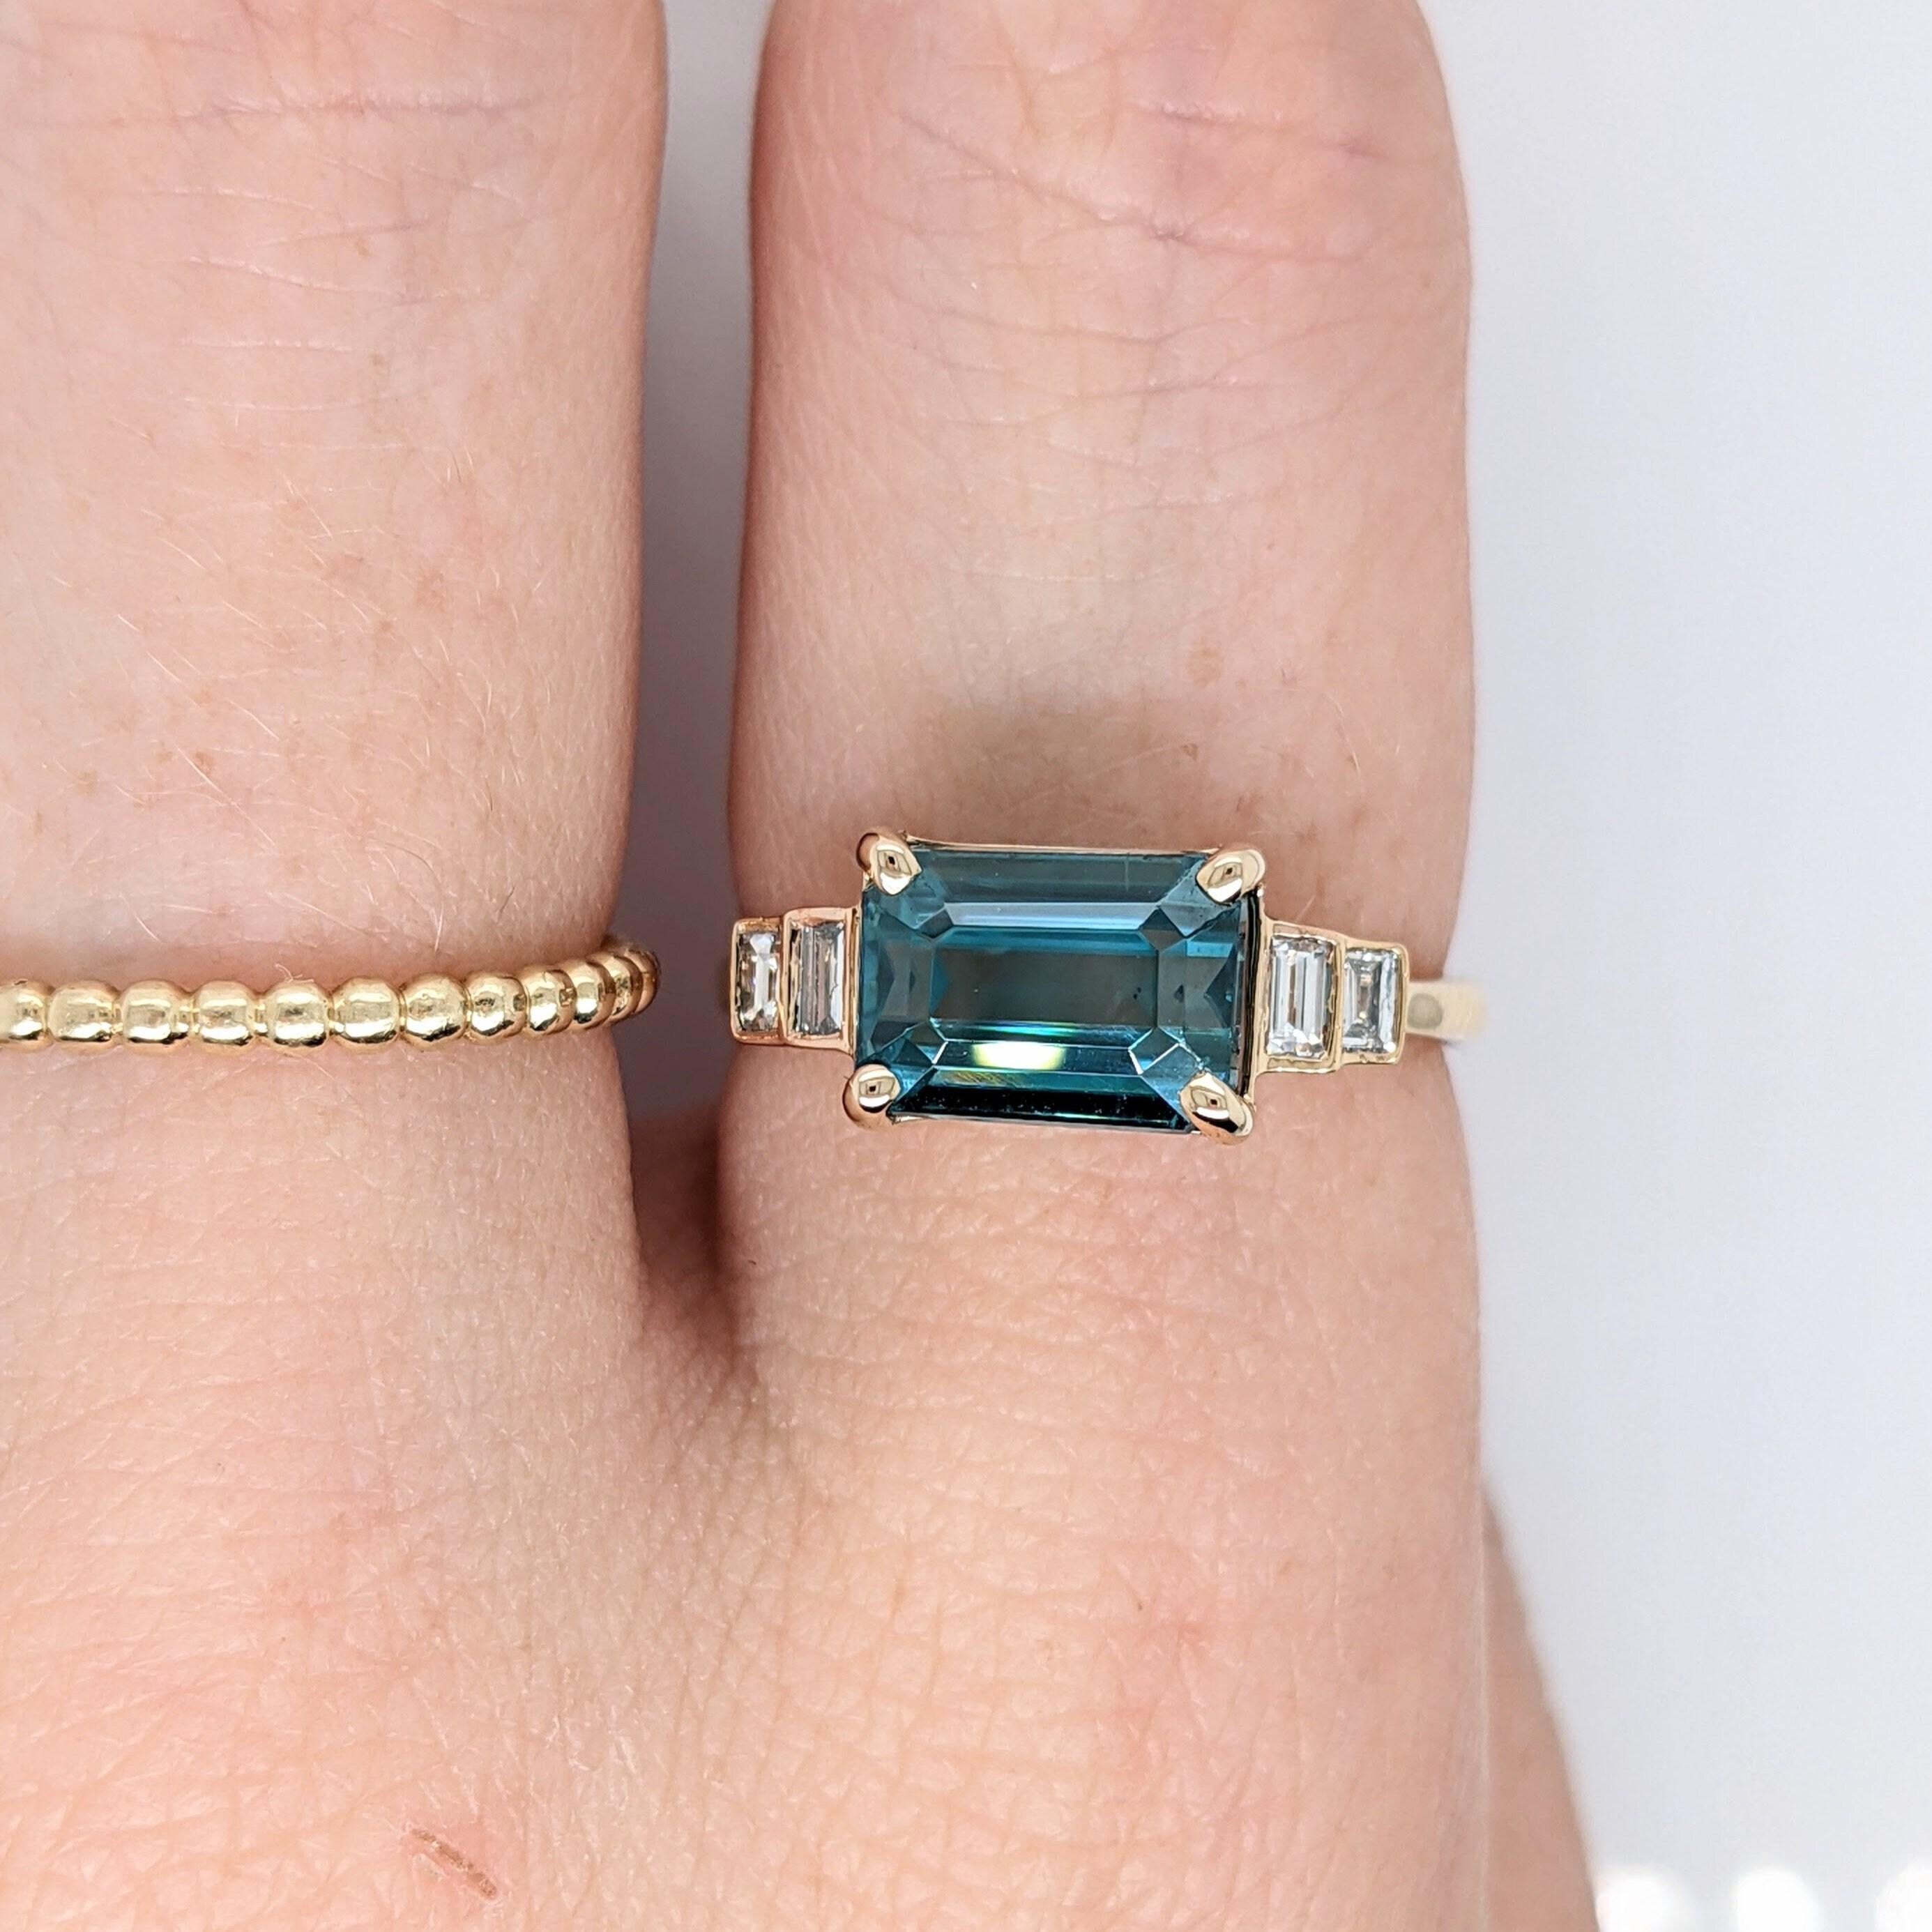 4.77ct Zircon w Baguette Diamond Accents in Solid 14K Gold Emerald Cut 9x6.5mm In New Condition For Sale In Columbus, OH